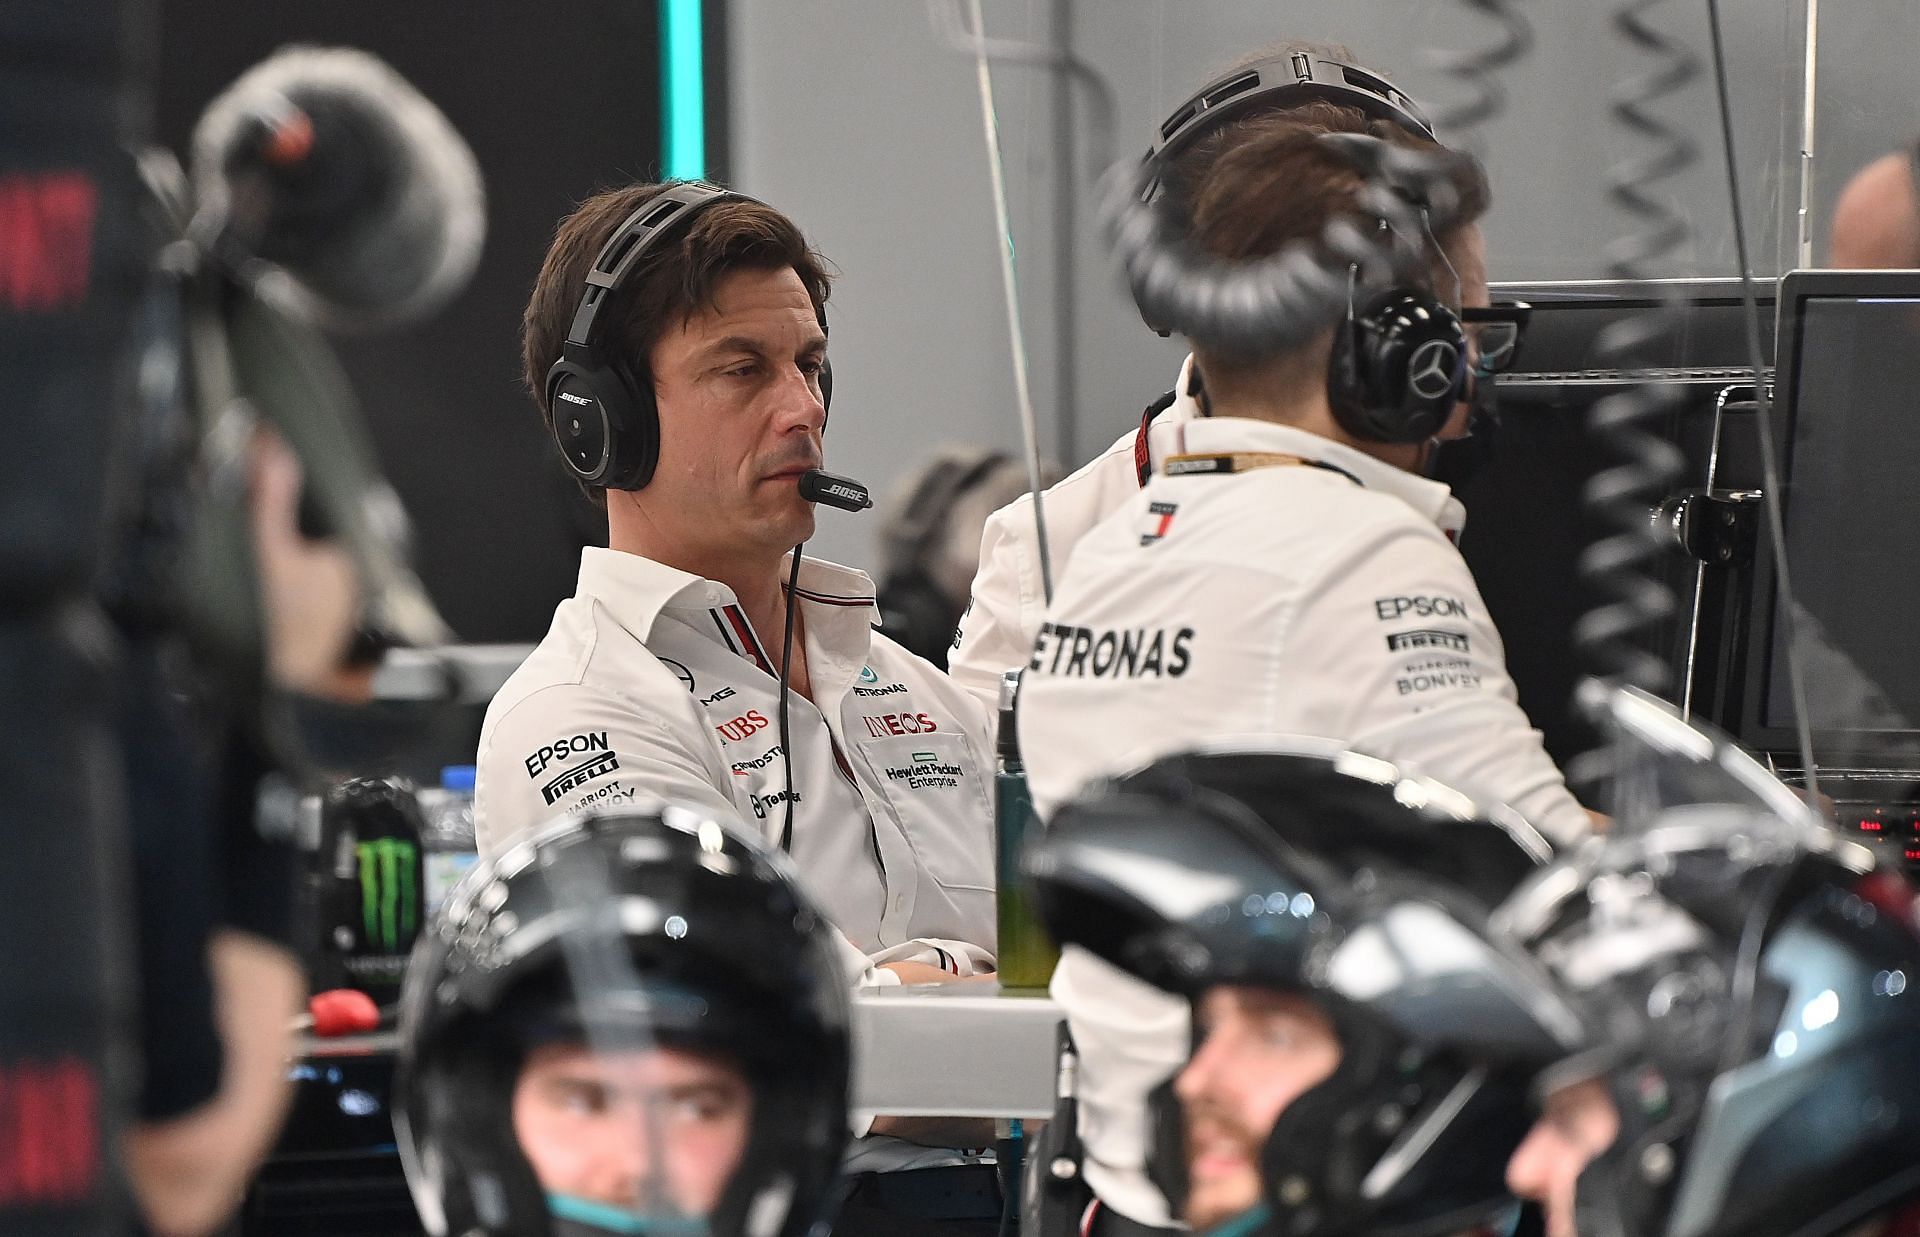 Toto Wolff during the 2021 F1 Abu Dhabi GP. (Photo by Andrej Isakovic - Pool/Getty Images)